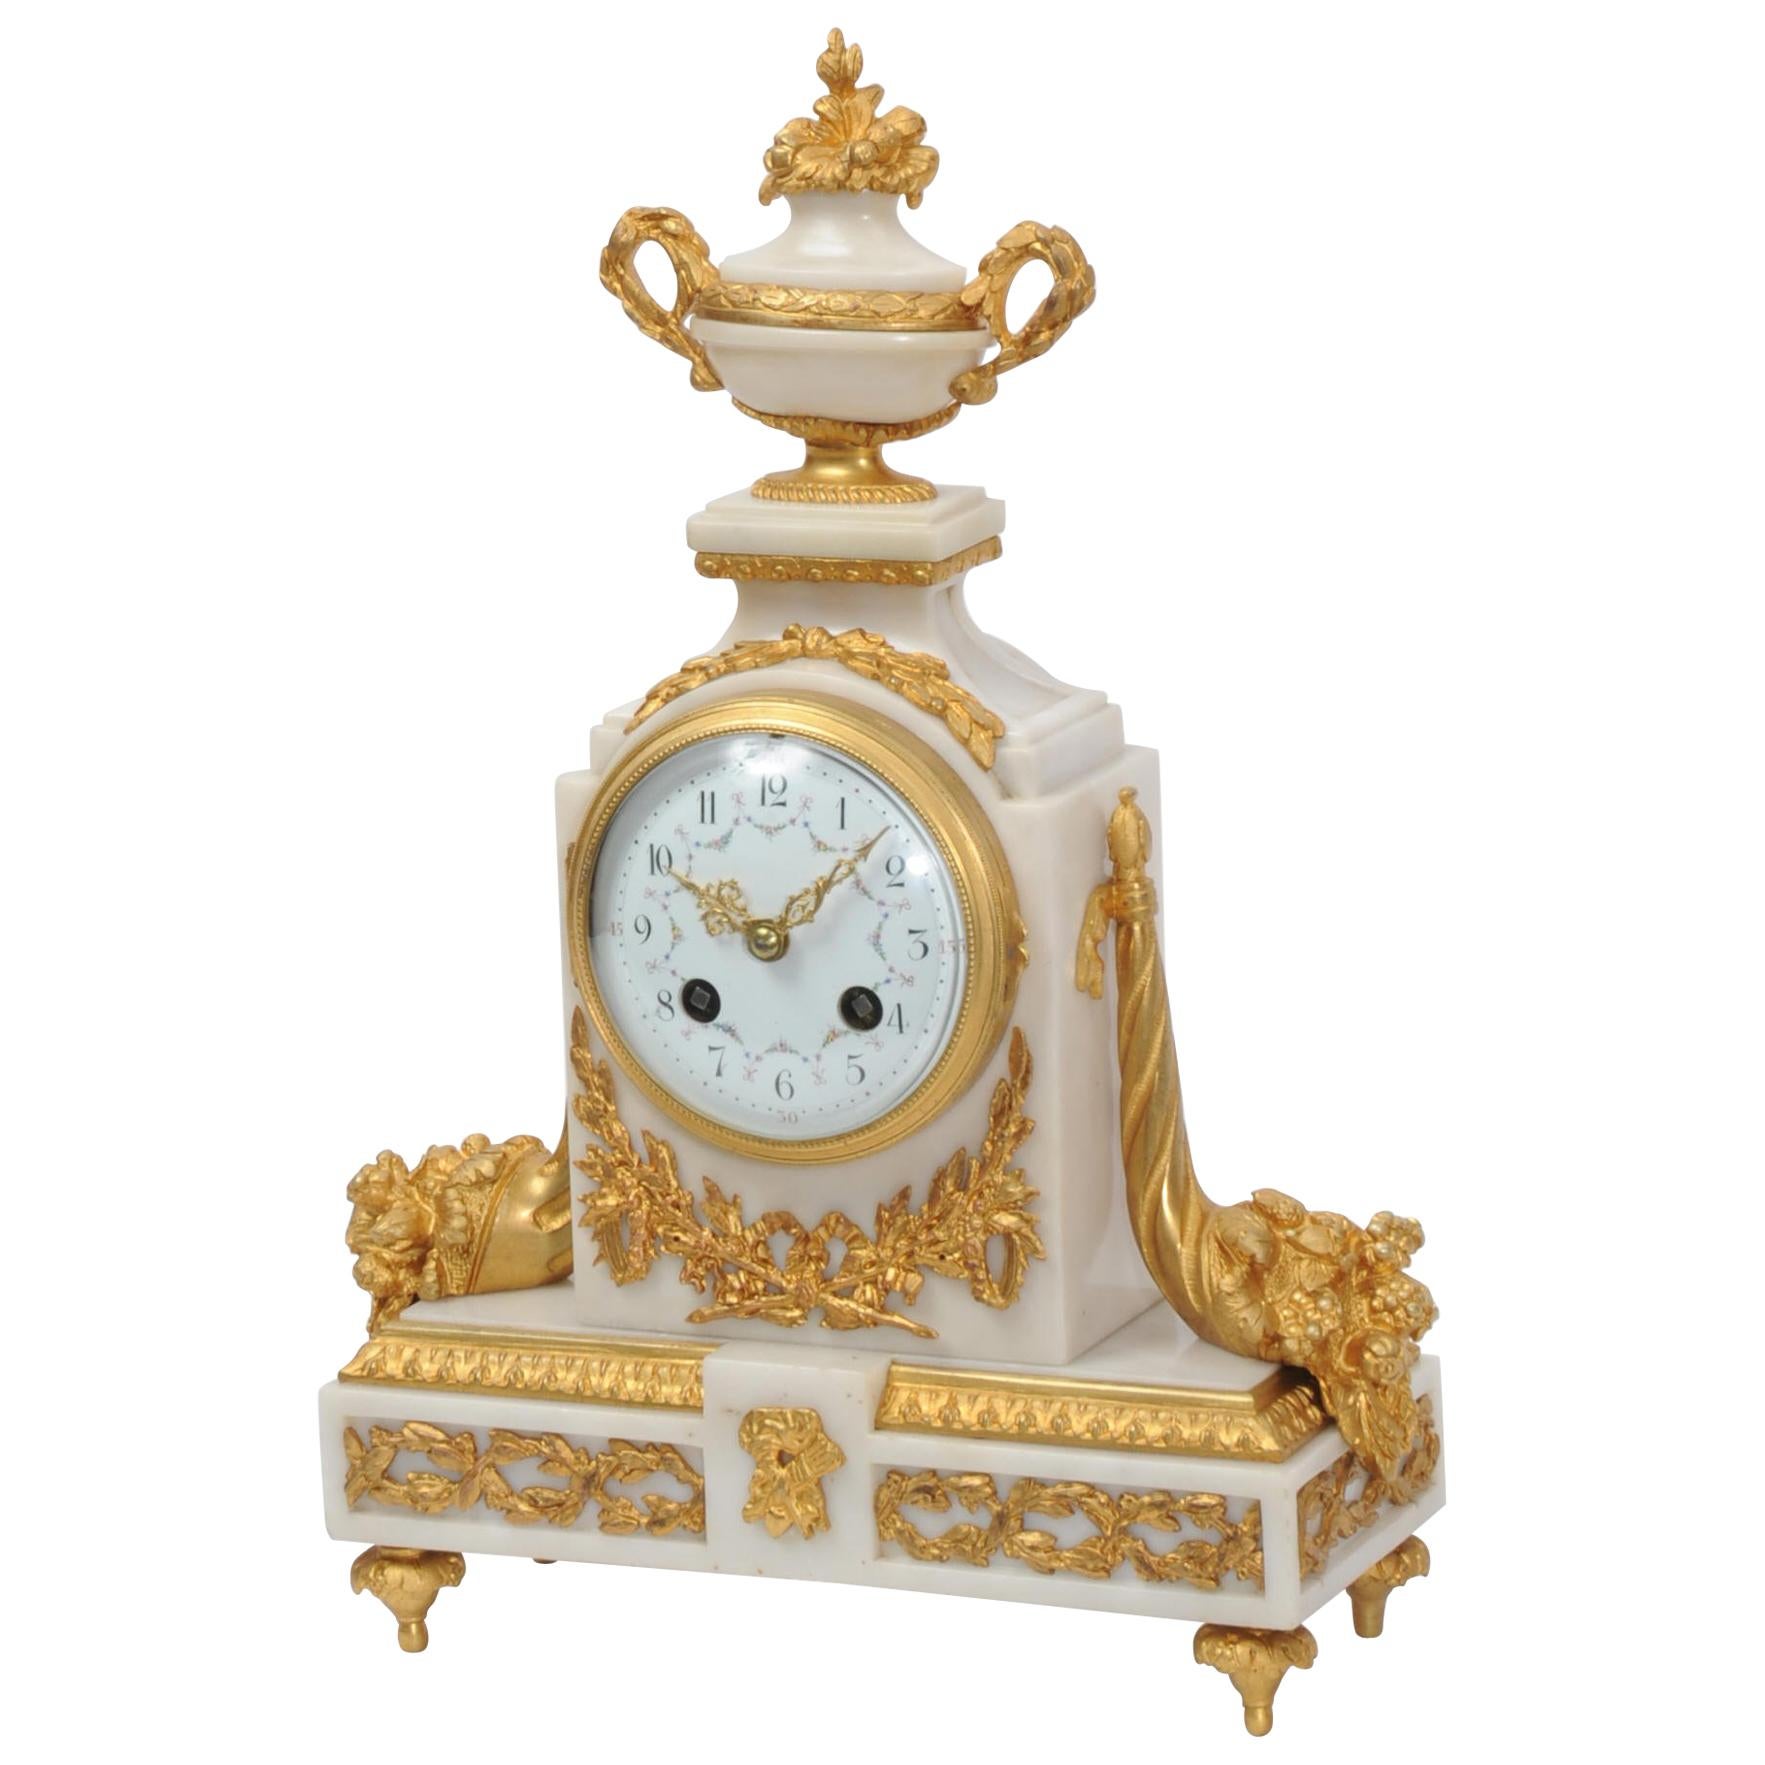 Antique French White Marble and Ormolu Boudoir Clock